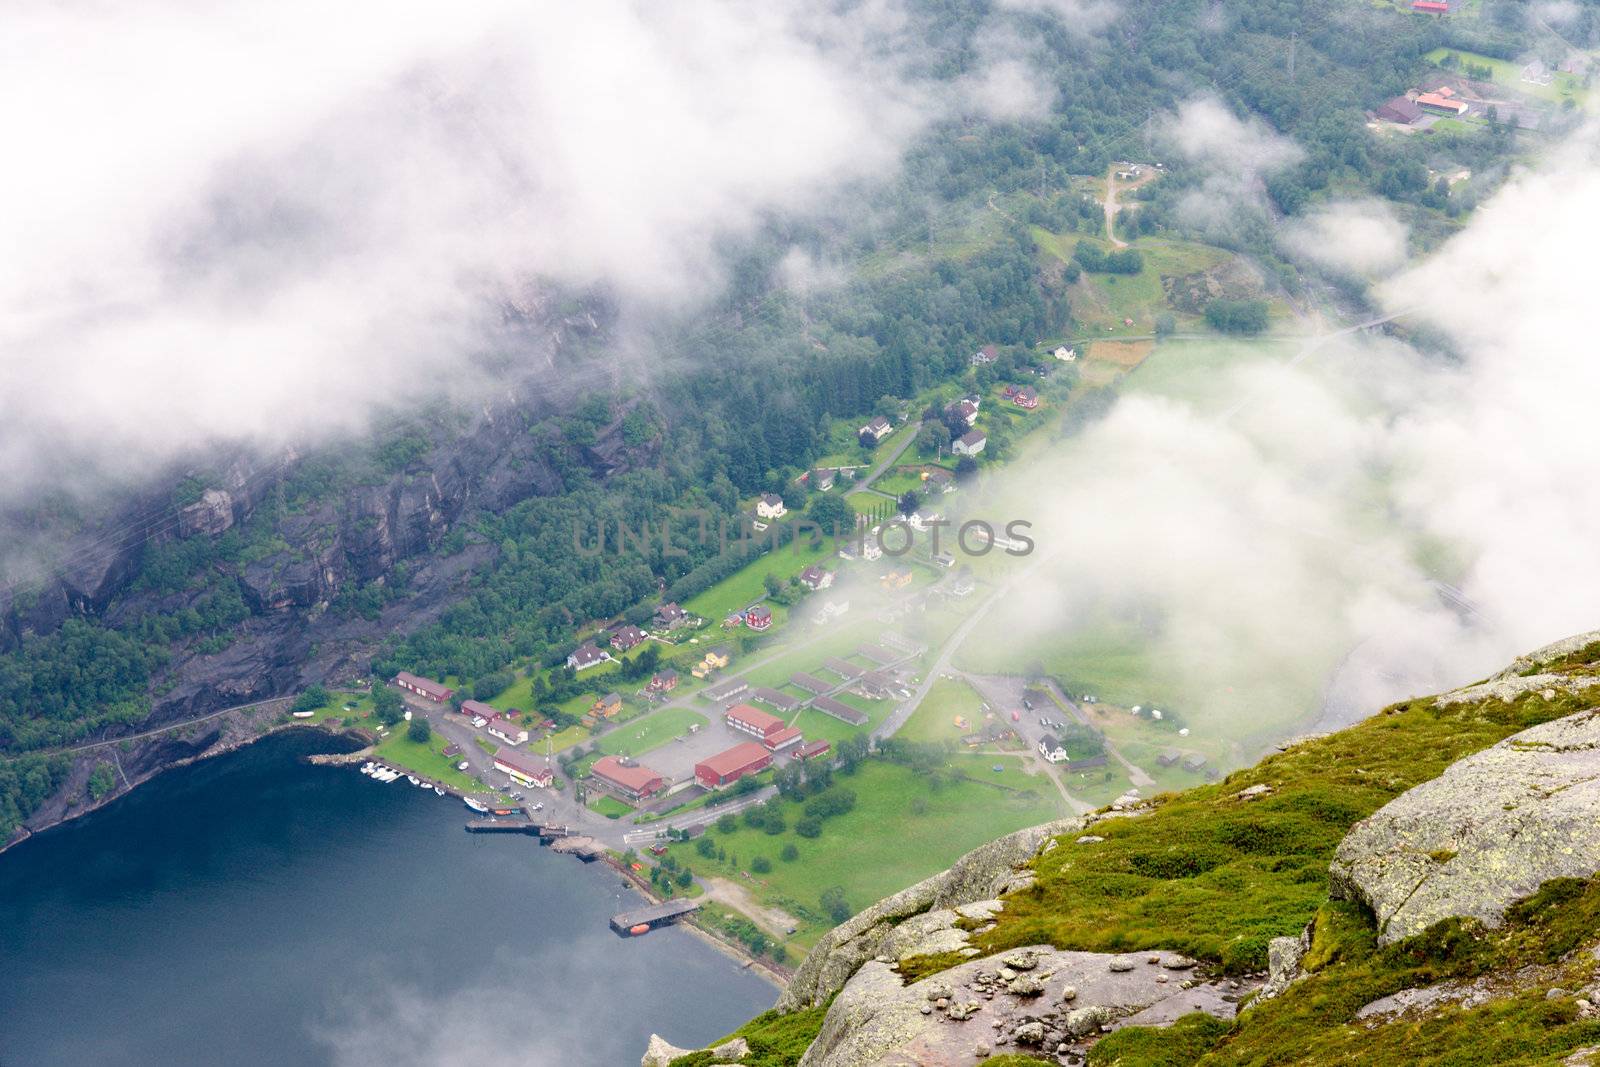 Lyseboten, Norway. About 800 m above sea level